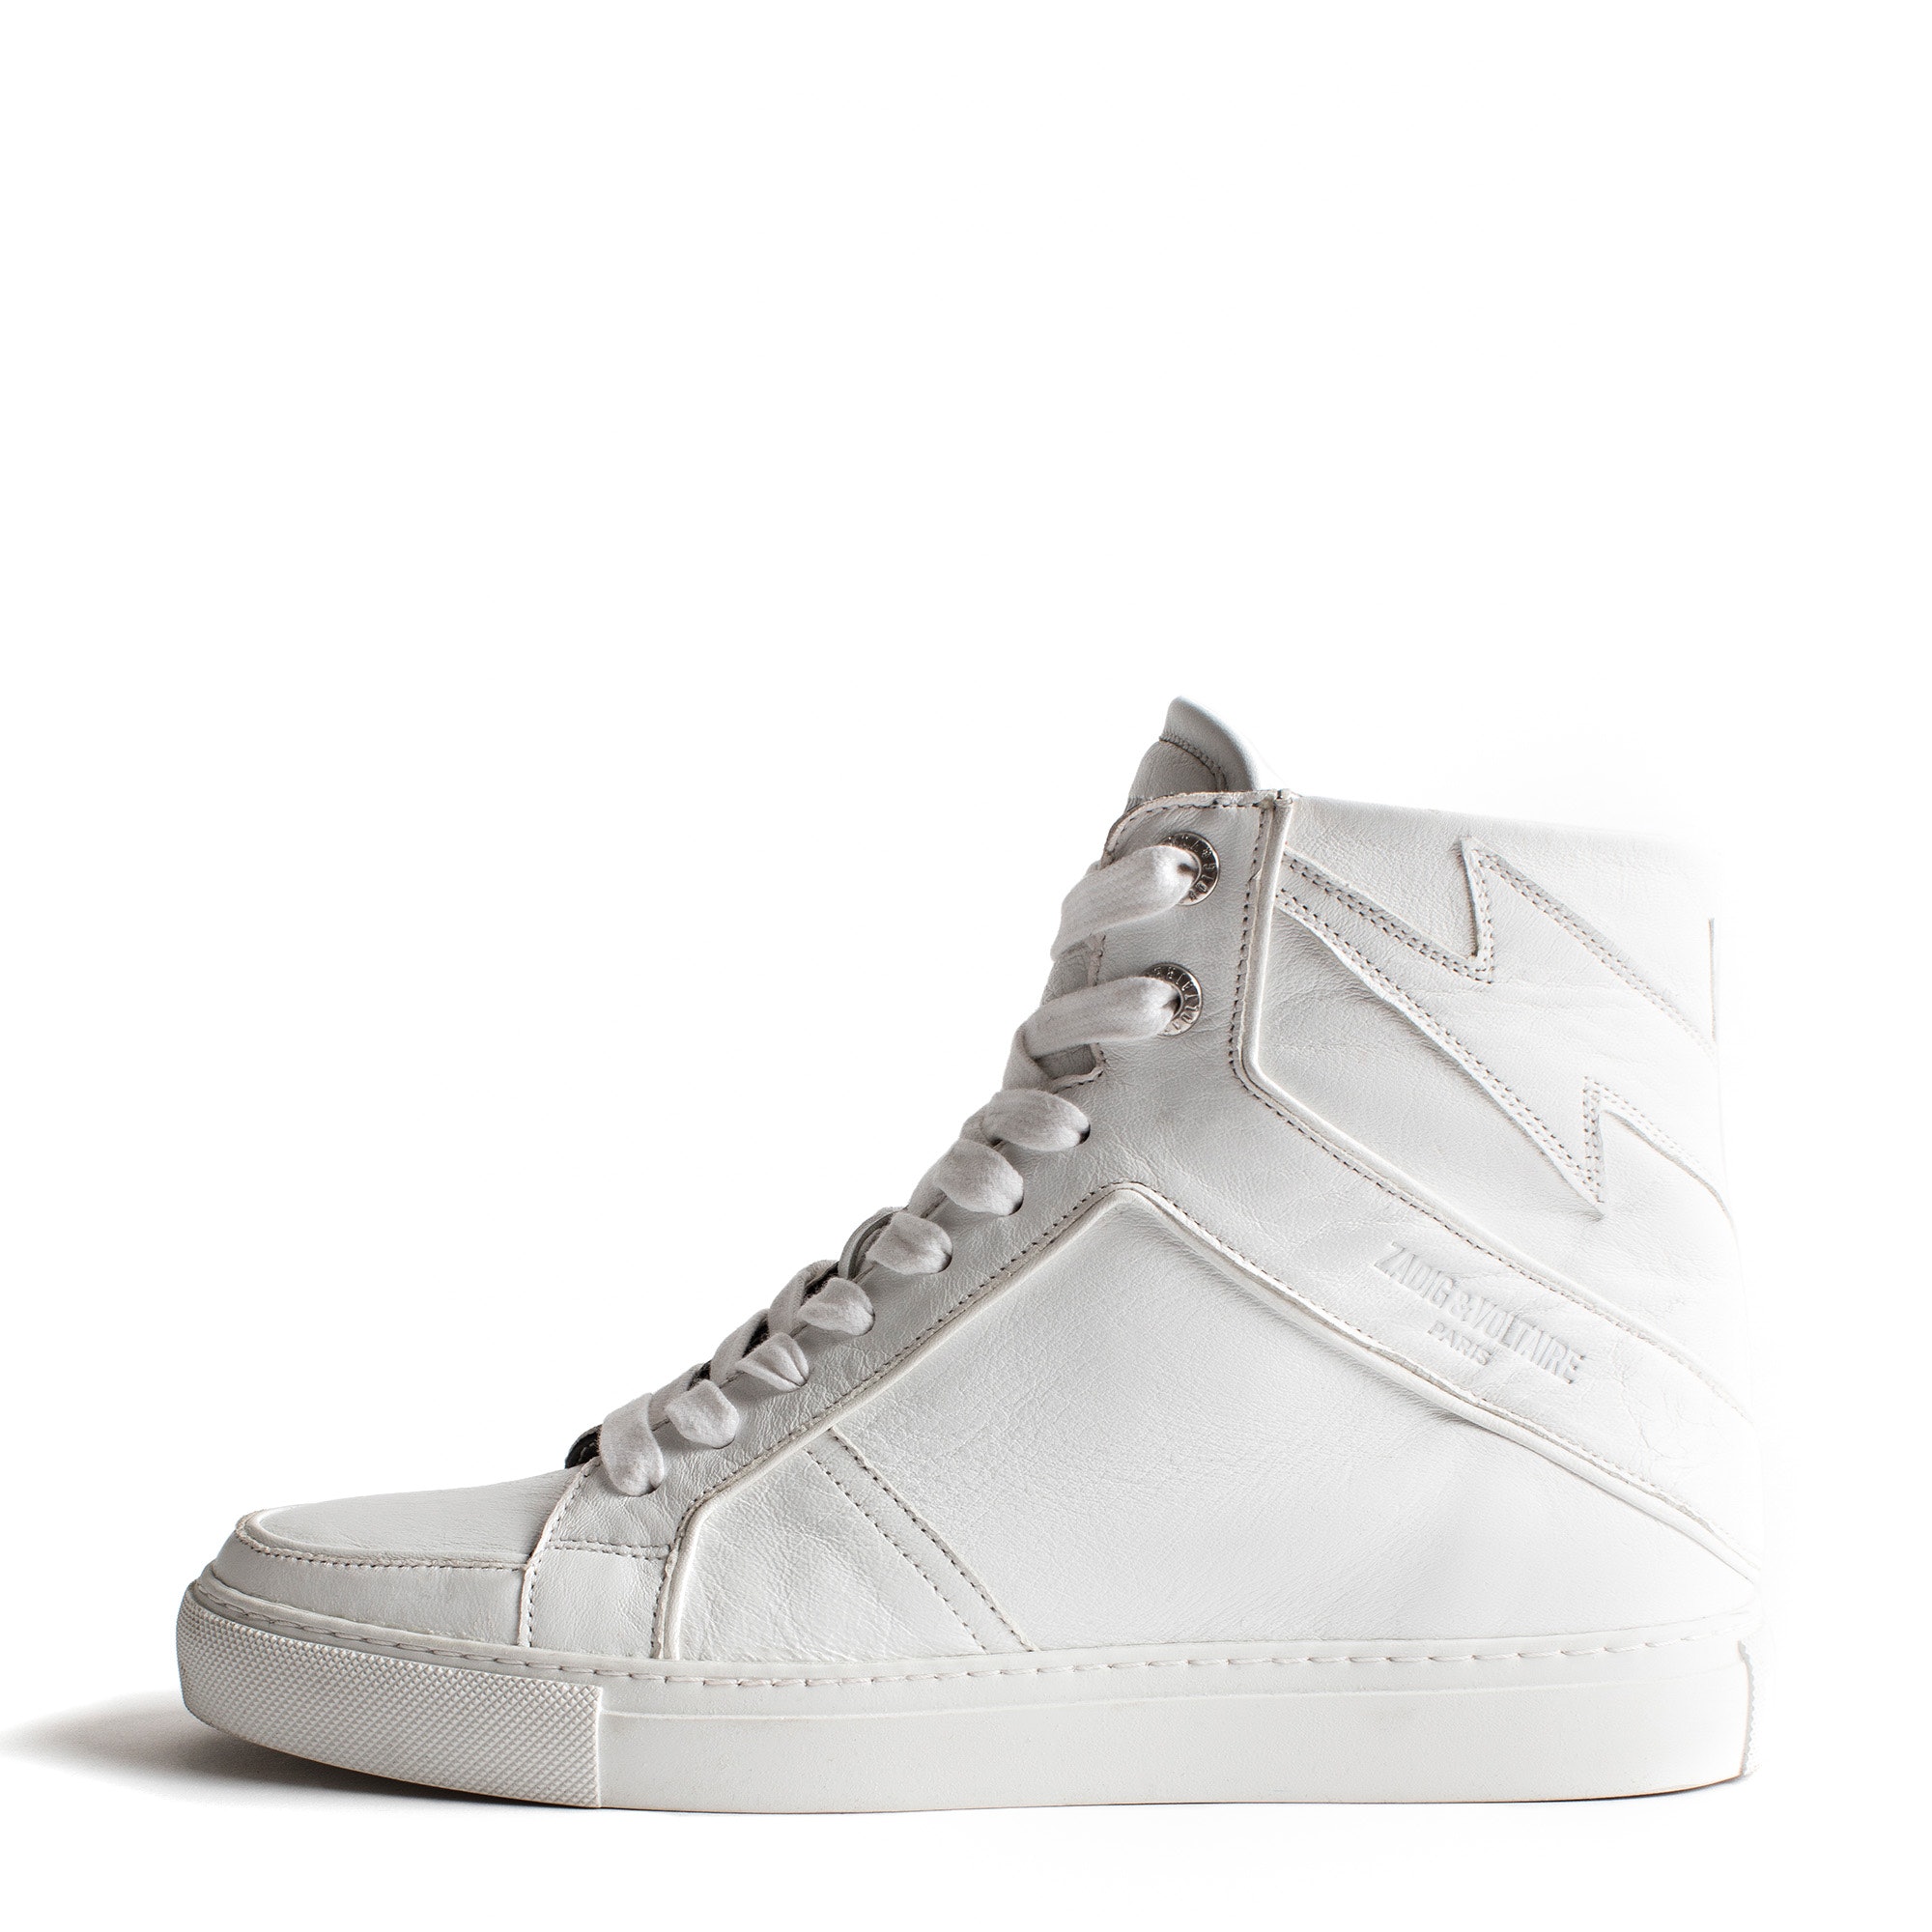 Sneakers Montantes Zv1747 High Flash Blanc - Taille 38 - Femme